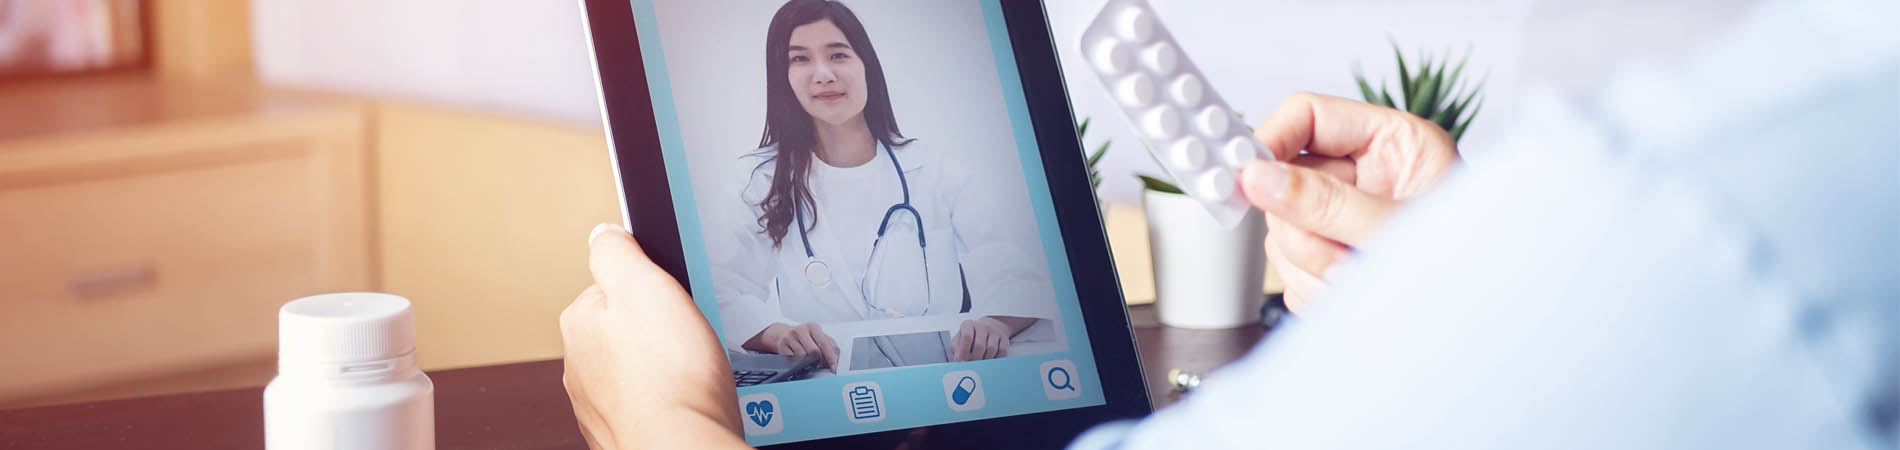 a telehealth visit shown through a patient showing a provider medicine